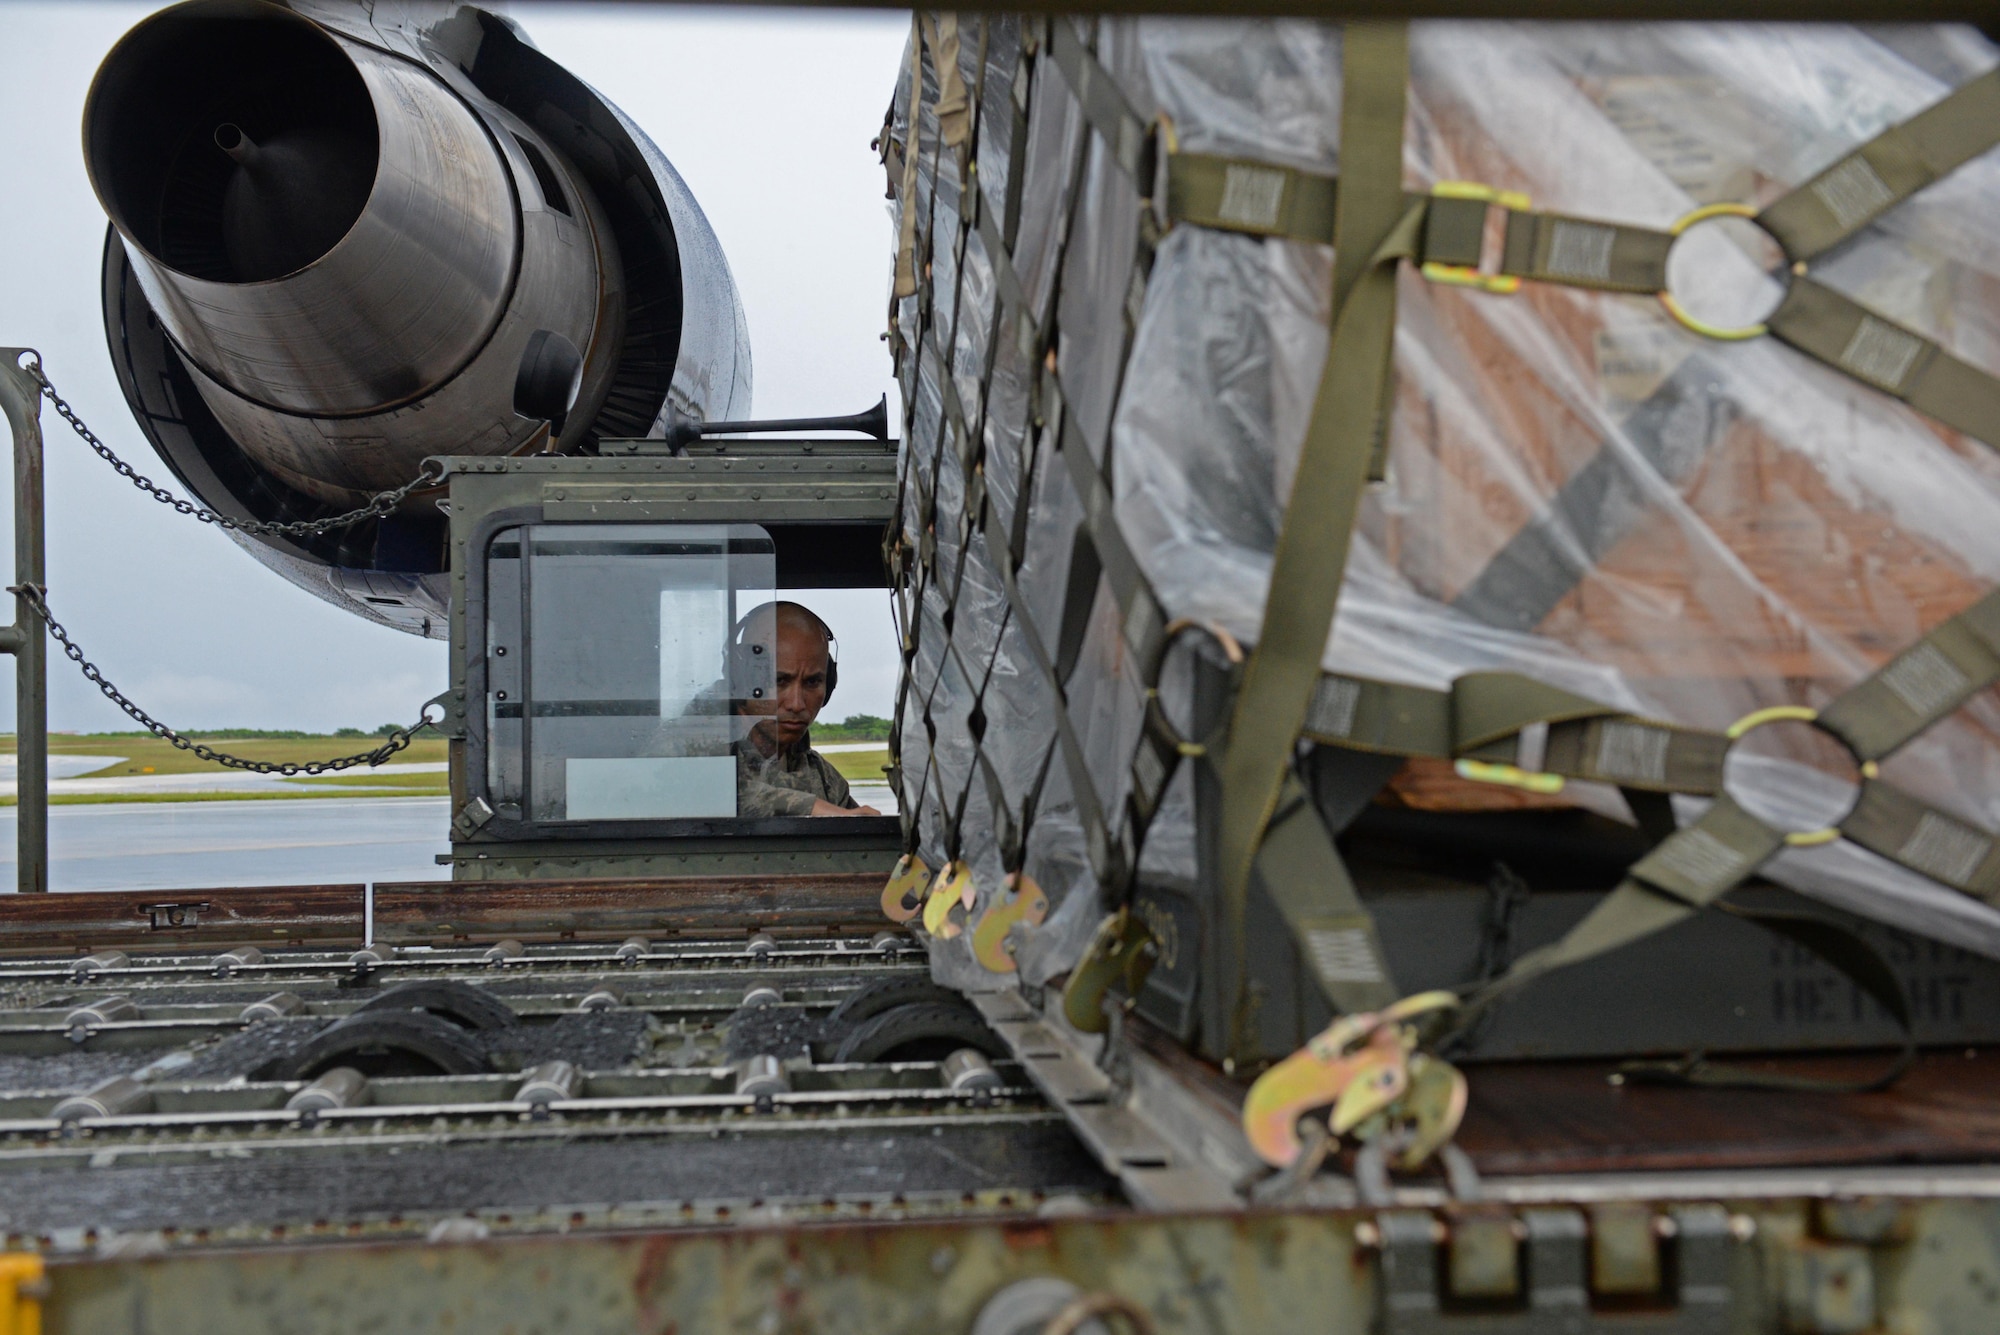 Kevin Mesa, 734th Air Mobility Squadron air freight service technician, operates a Tunner 60K aircraft cargo loader Sept. 7, 2016, at Andersen Air Force Base, Guam. The Tunner 60K aircraft cargo loader is capable of transporting up to six cargo pallets at a maximum speed of 23 mph. The vehicle’s deck elevates from 39 inches to 18 feet 6 inches high and employs a powered conveyor system to move cargo. (U.S. Air Force photo by Airman 1st Class Jacob Skovo)